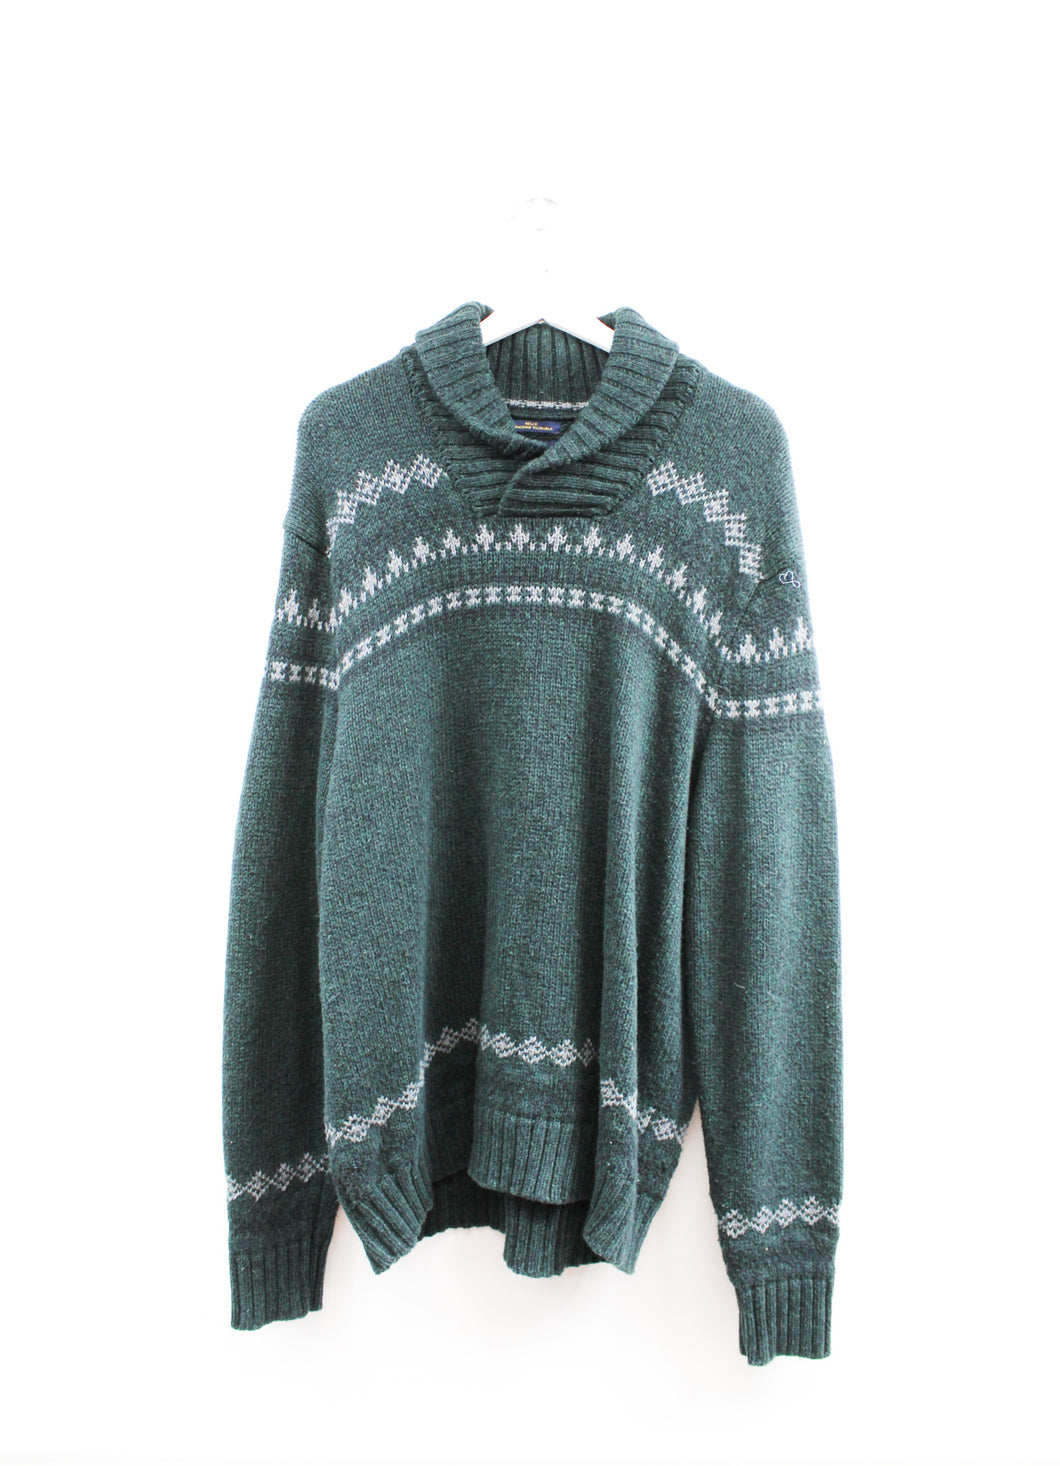 Vintage American Eagle Knit Sweater